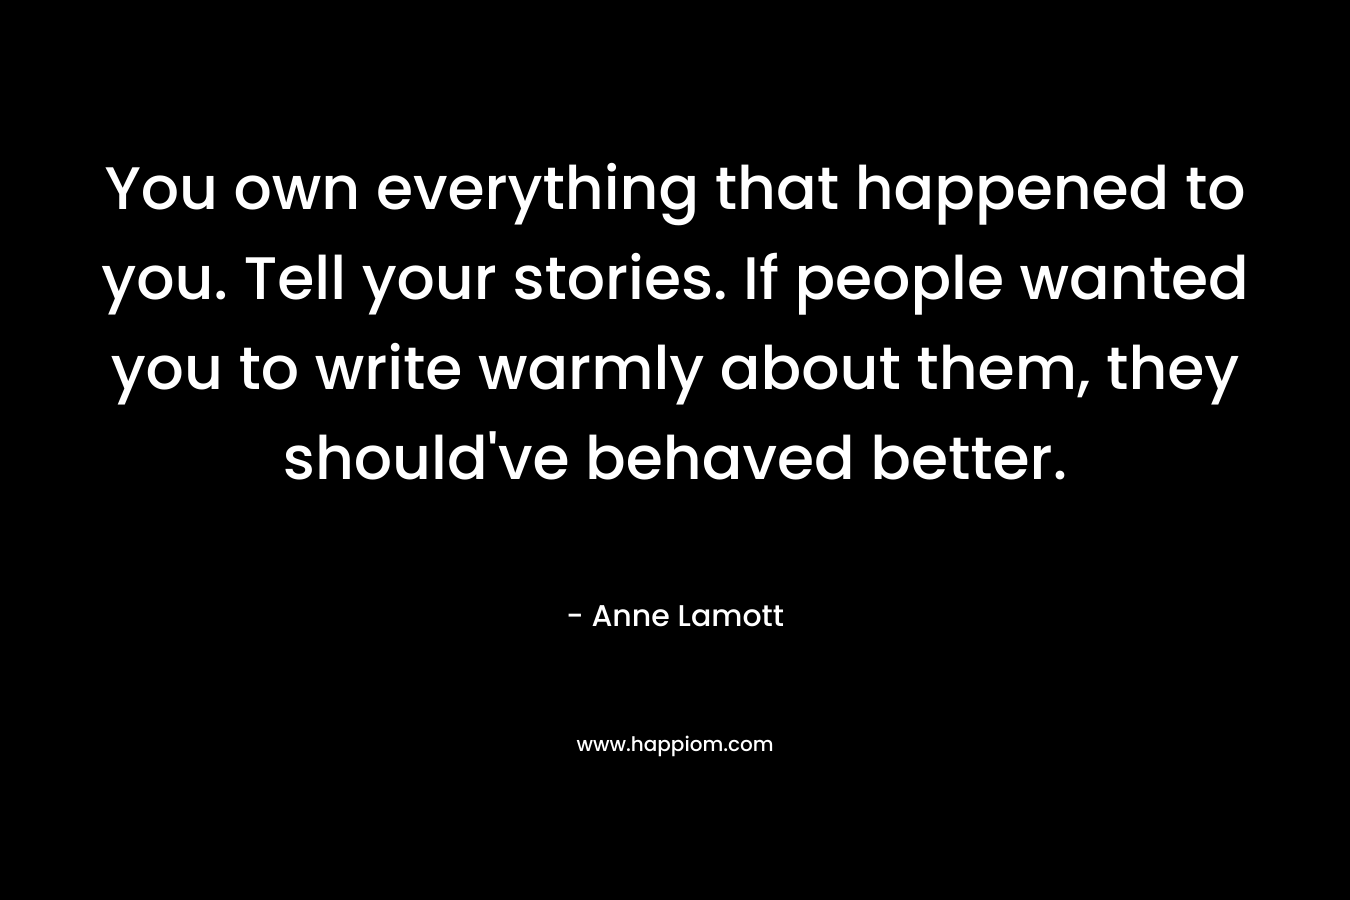 You own everything that happened to you. Tell your stories. If people wanted you to write warmly about them, they should’ve behaved better. – Anne Lamott